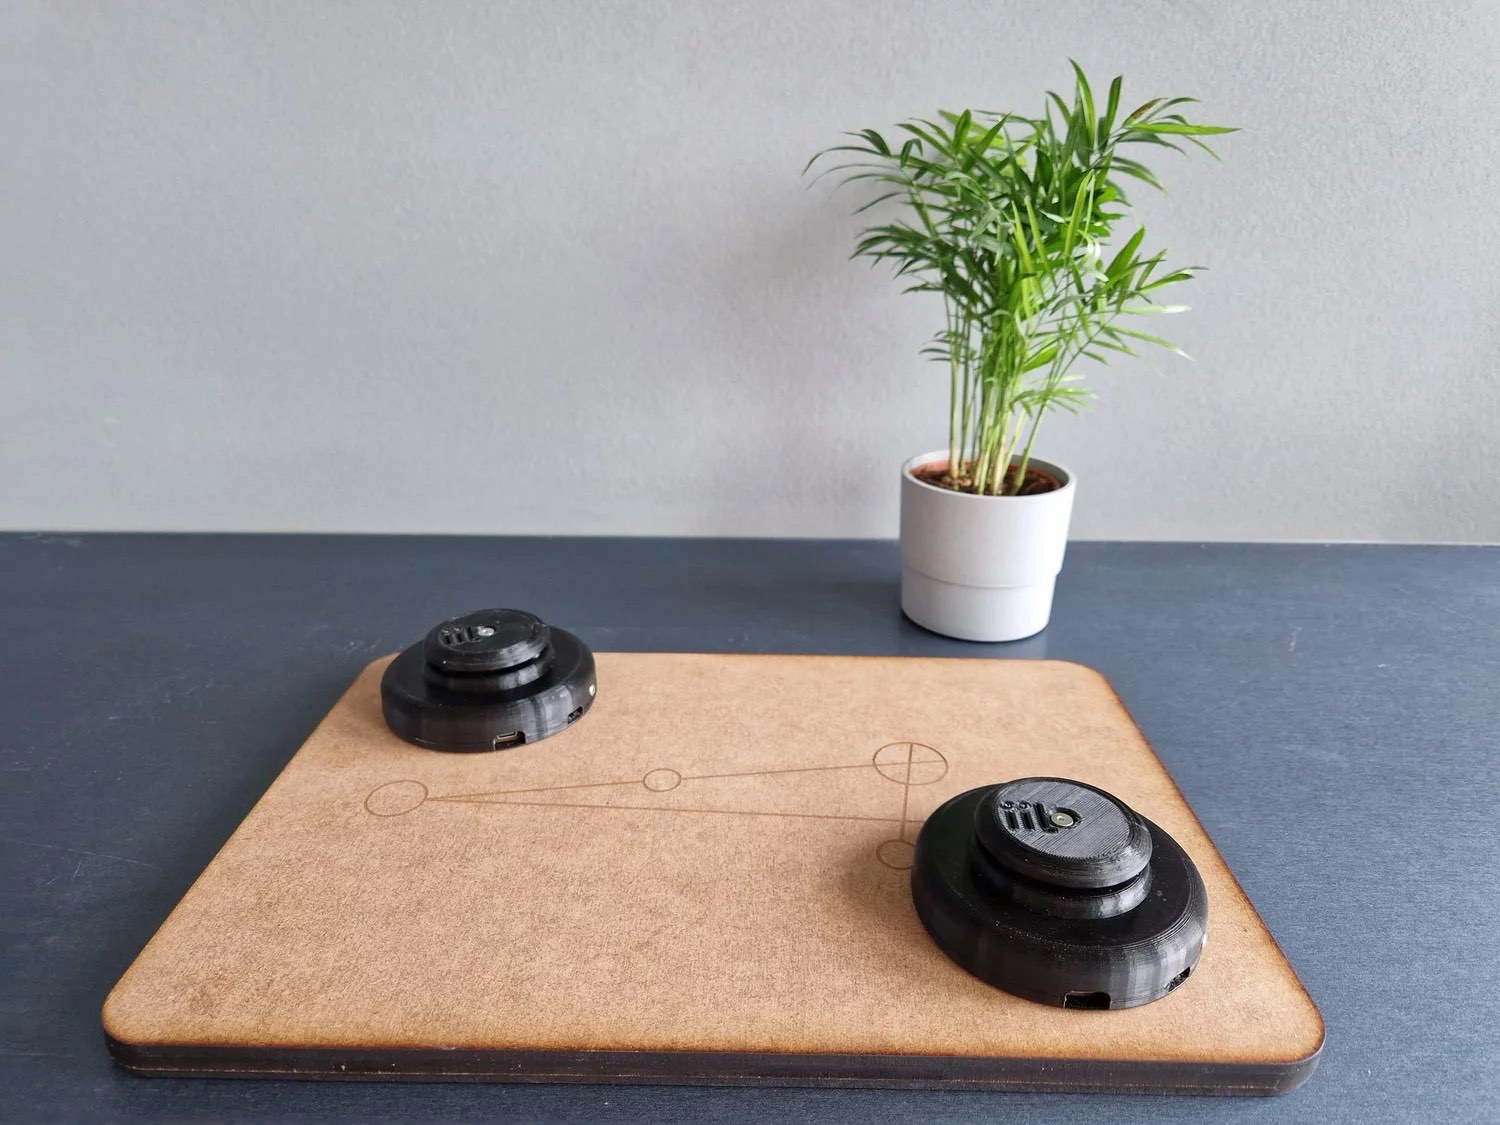 Two black pucks on a wooden palette with markings on it